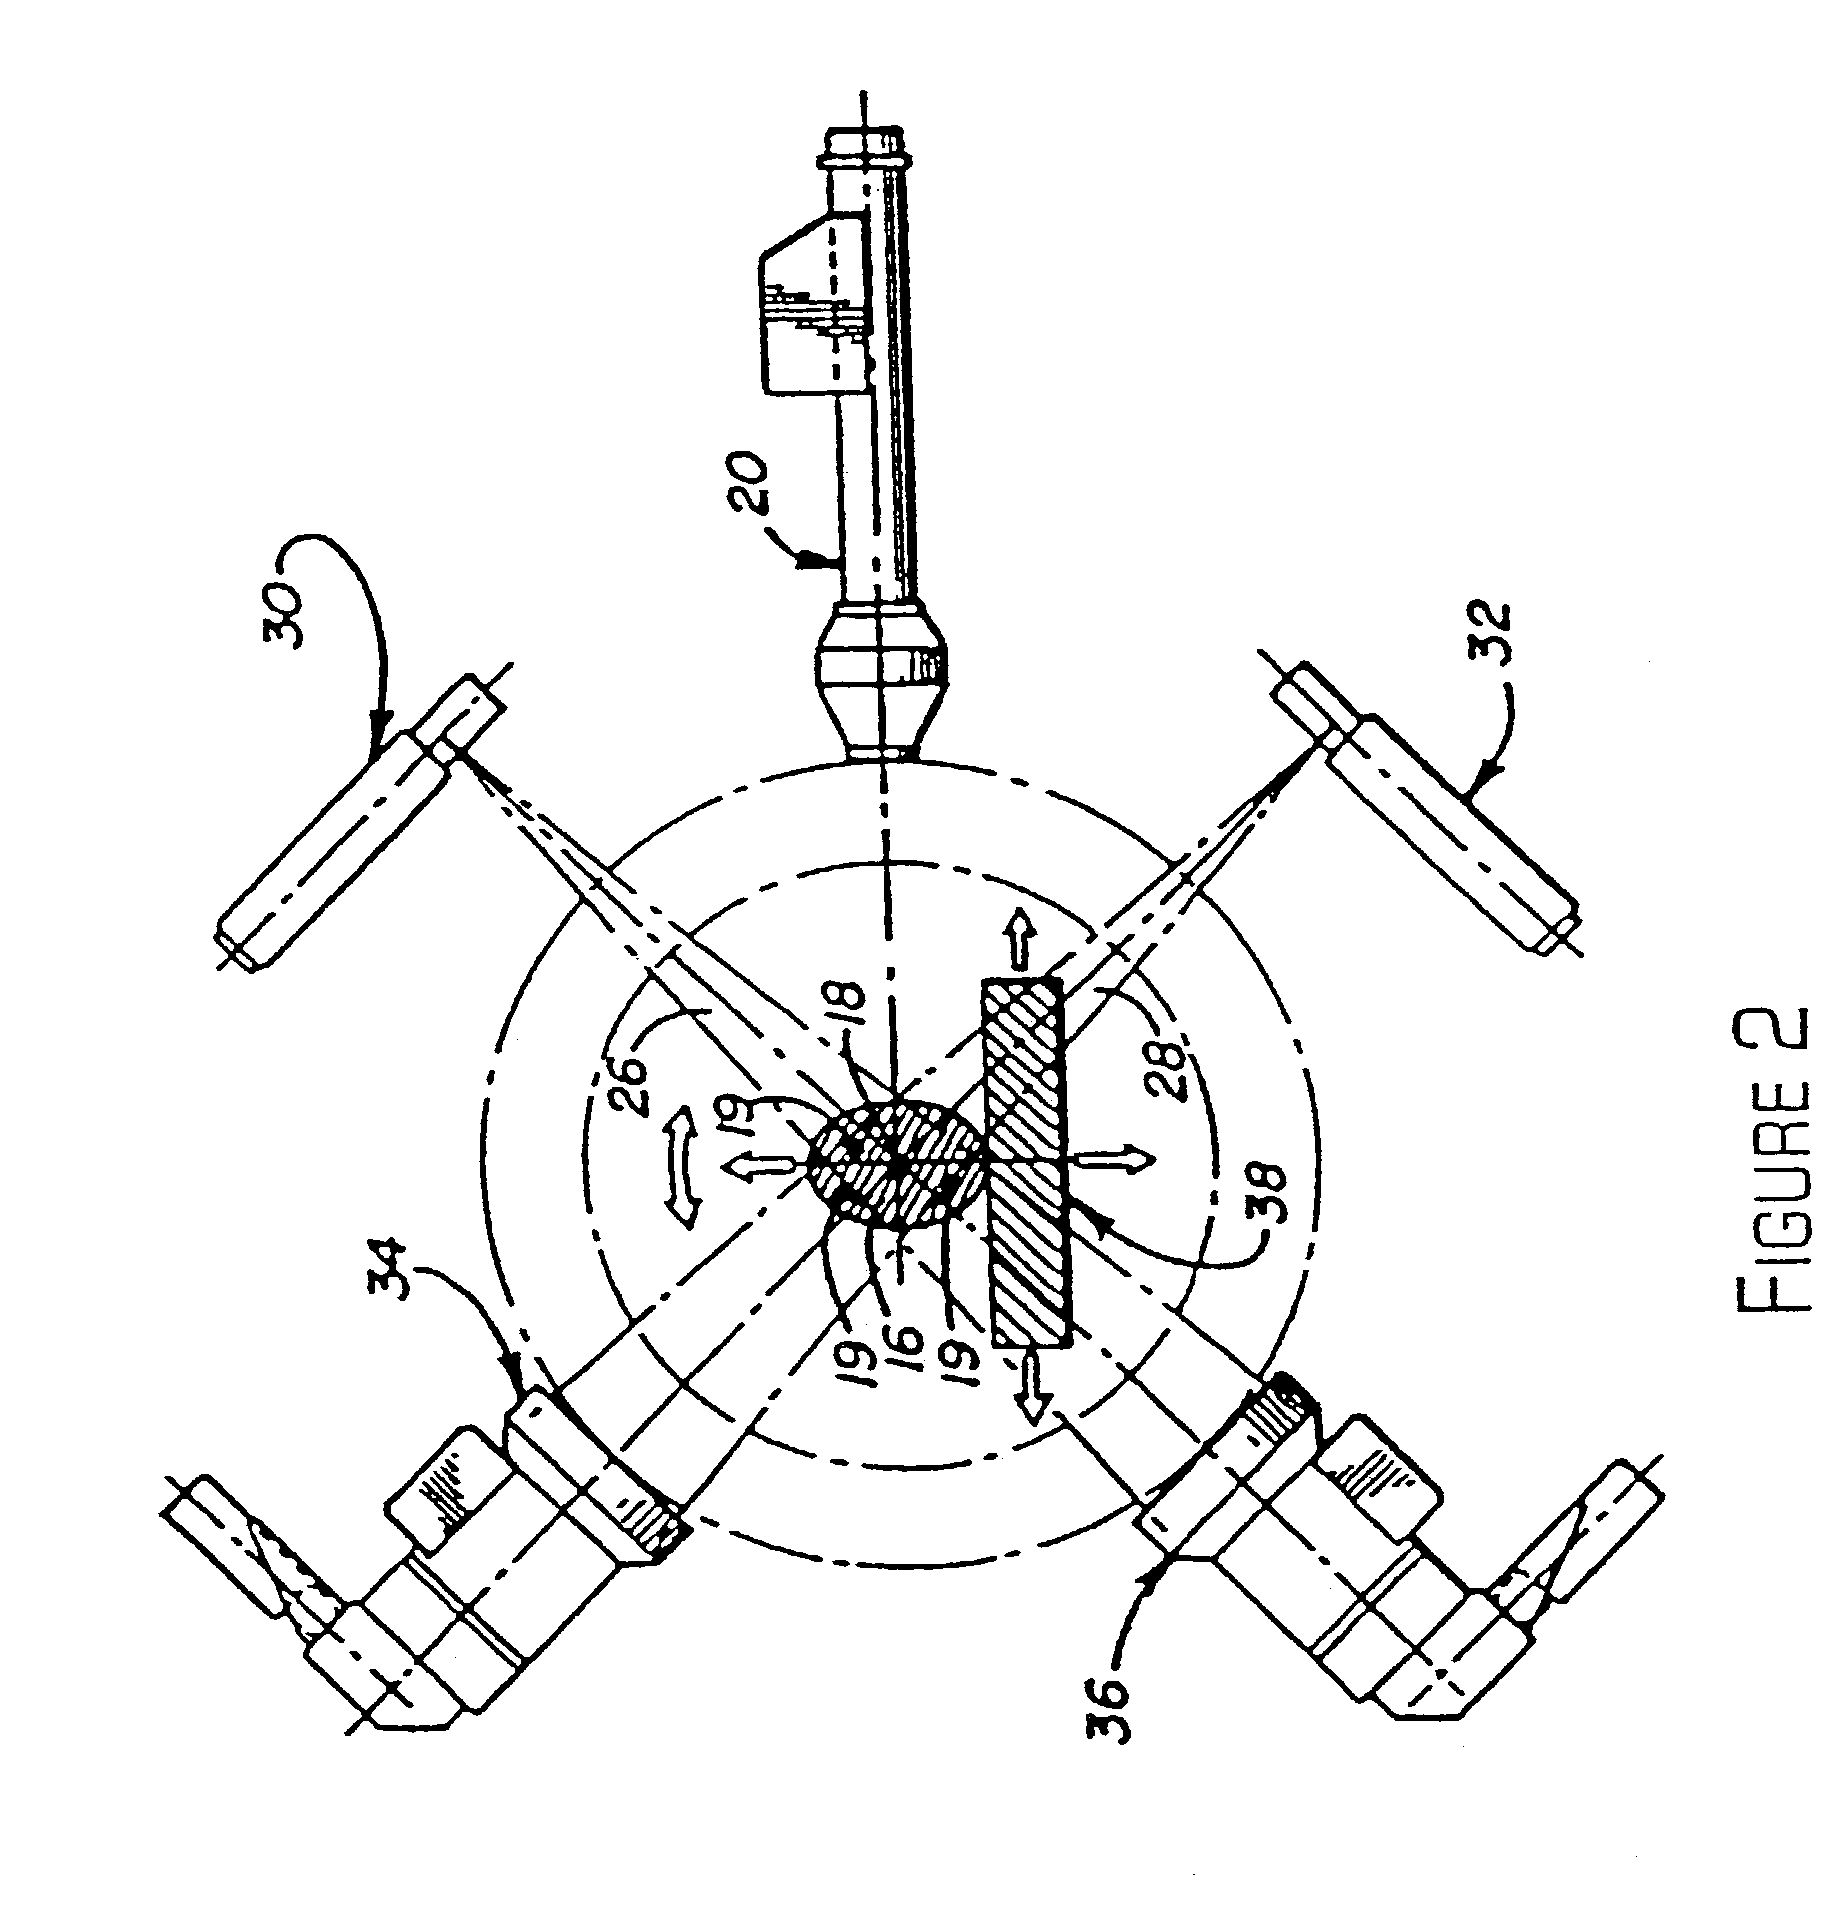 Apparatus and method for compensating for respiratory and patient motion during treatment